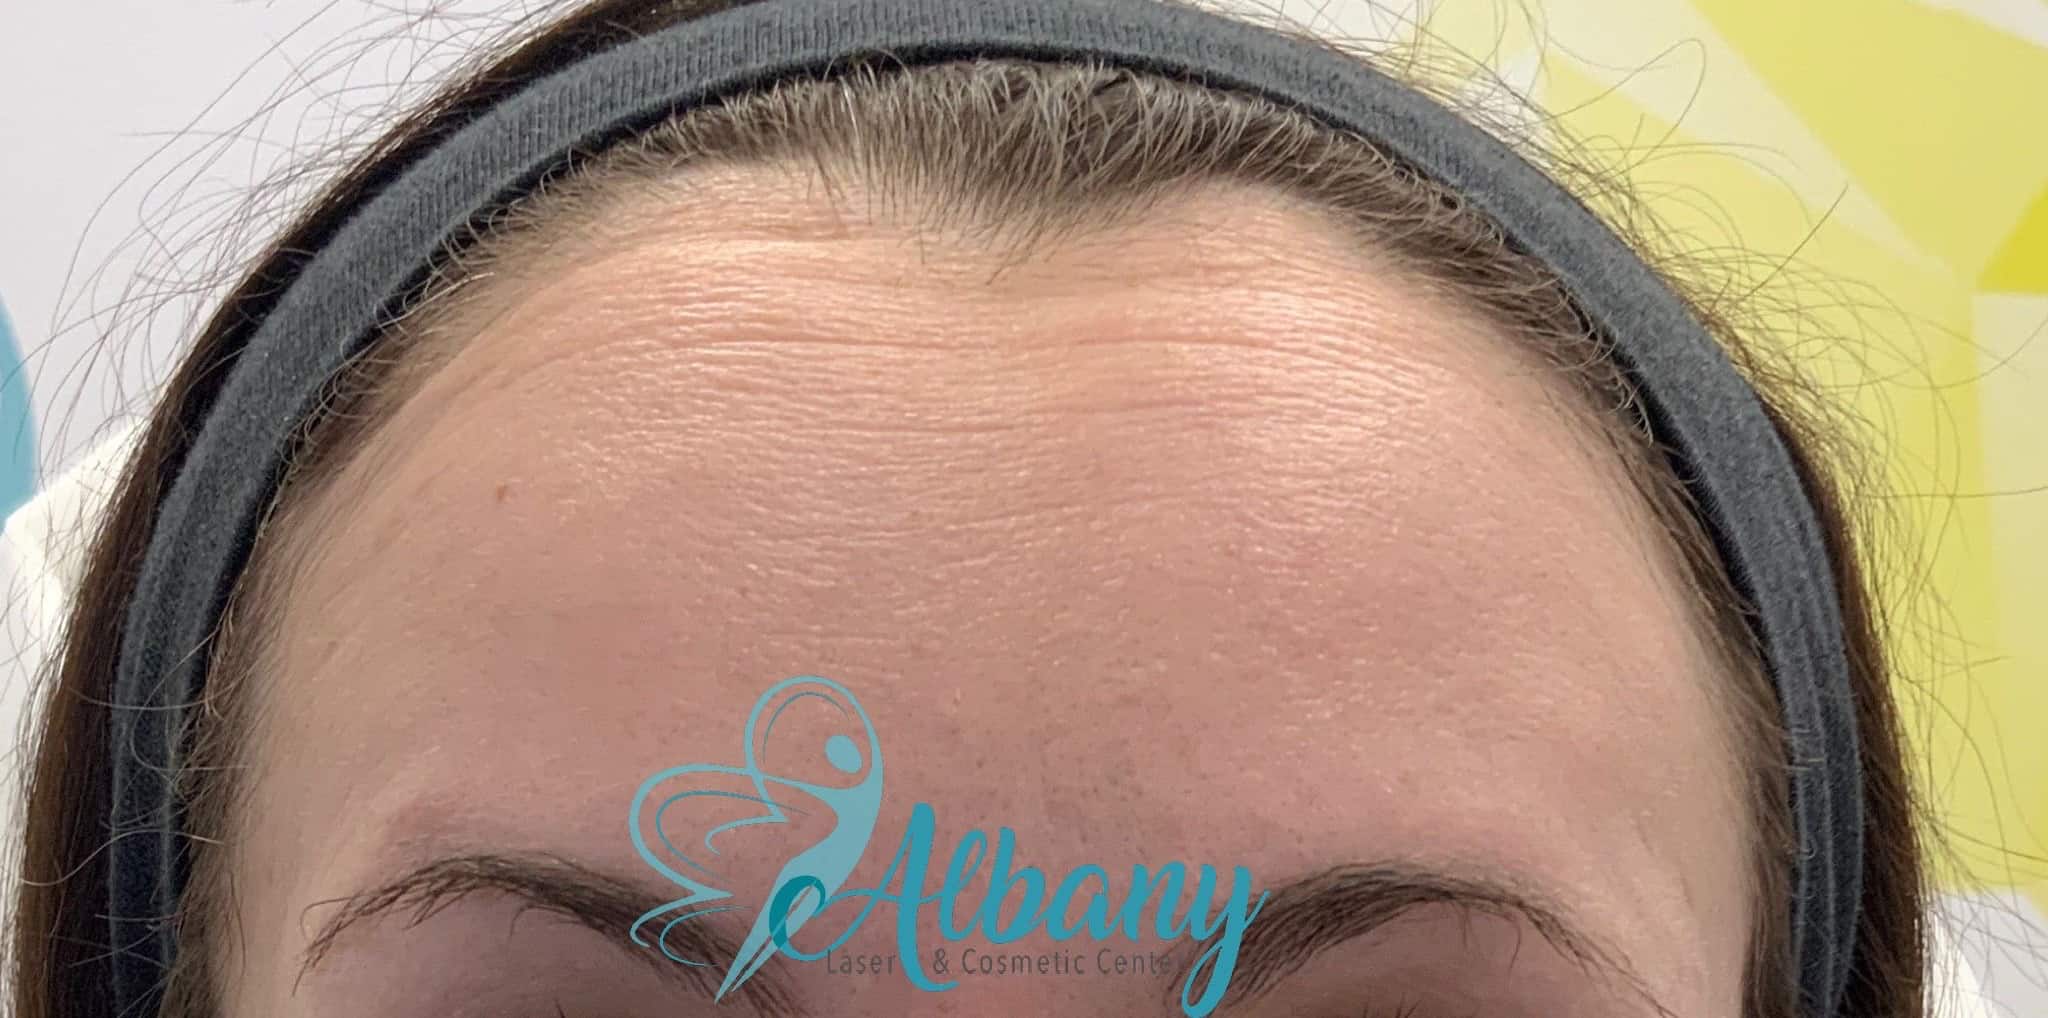 Forehead before Botox treatment, showing lines and wrinkles